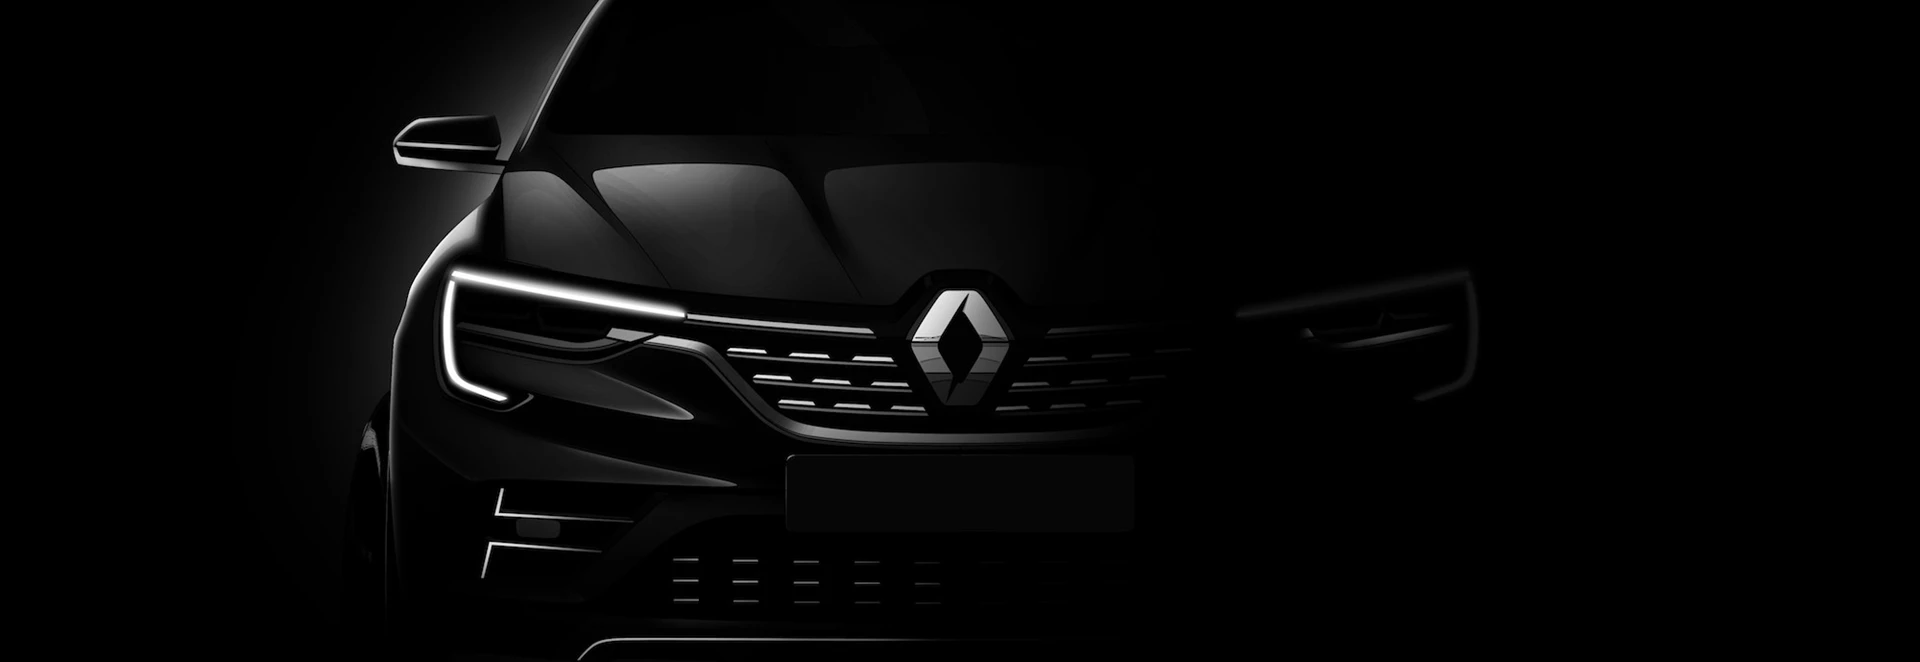 Renault releases name for upcoming crossover